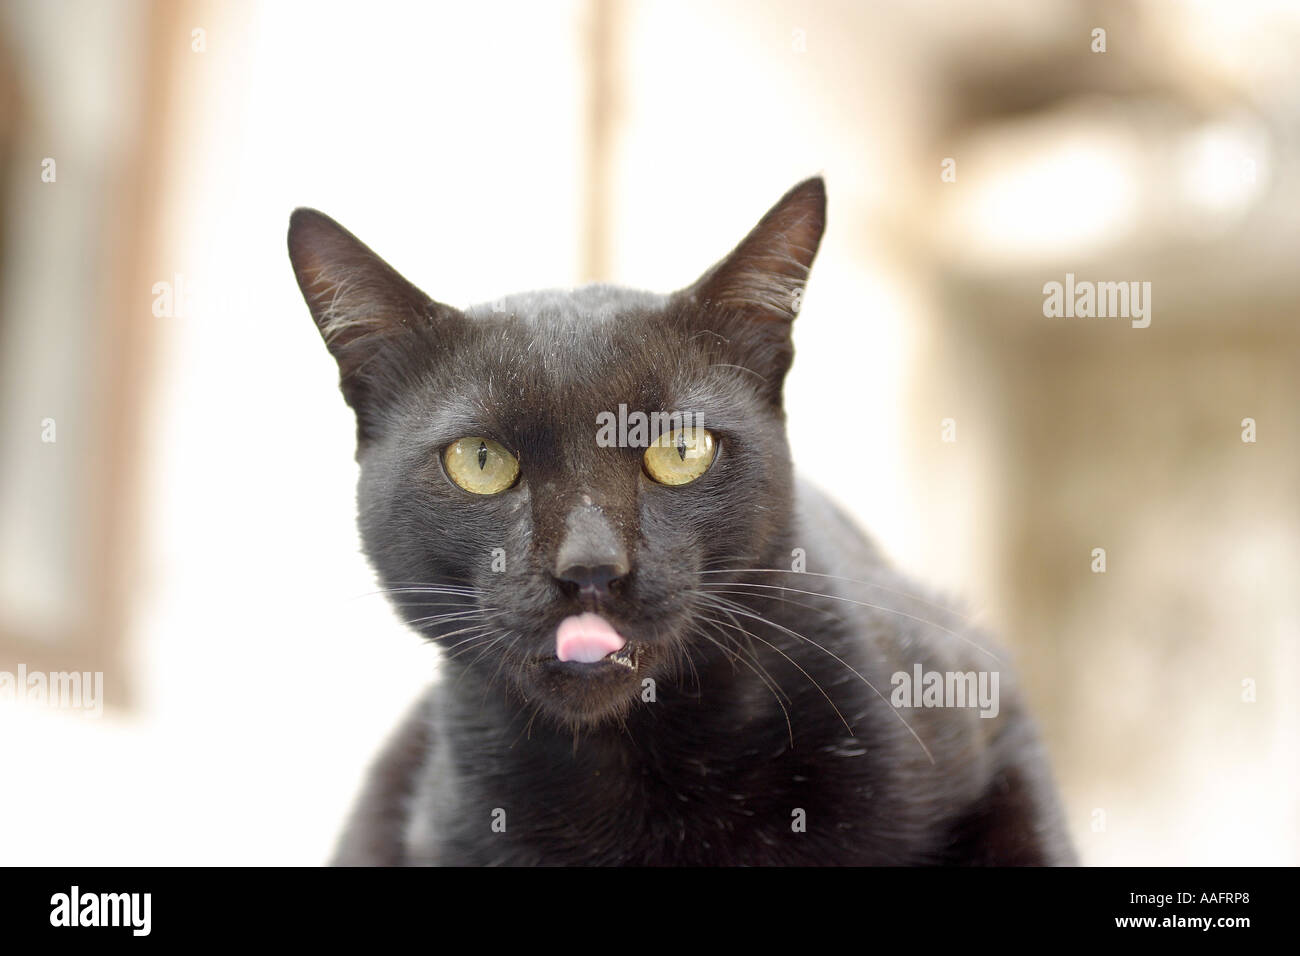 HPA78550 Black Cat looking at camera lips showing licking tounge Stock Photo